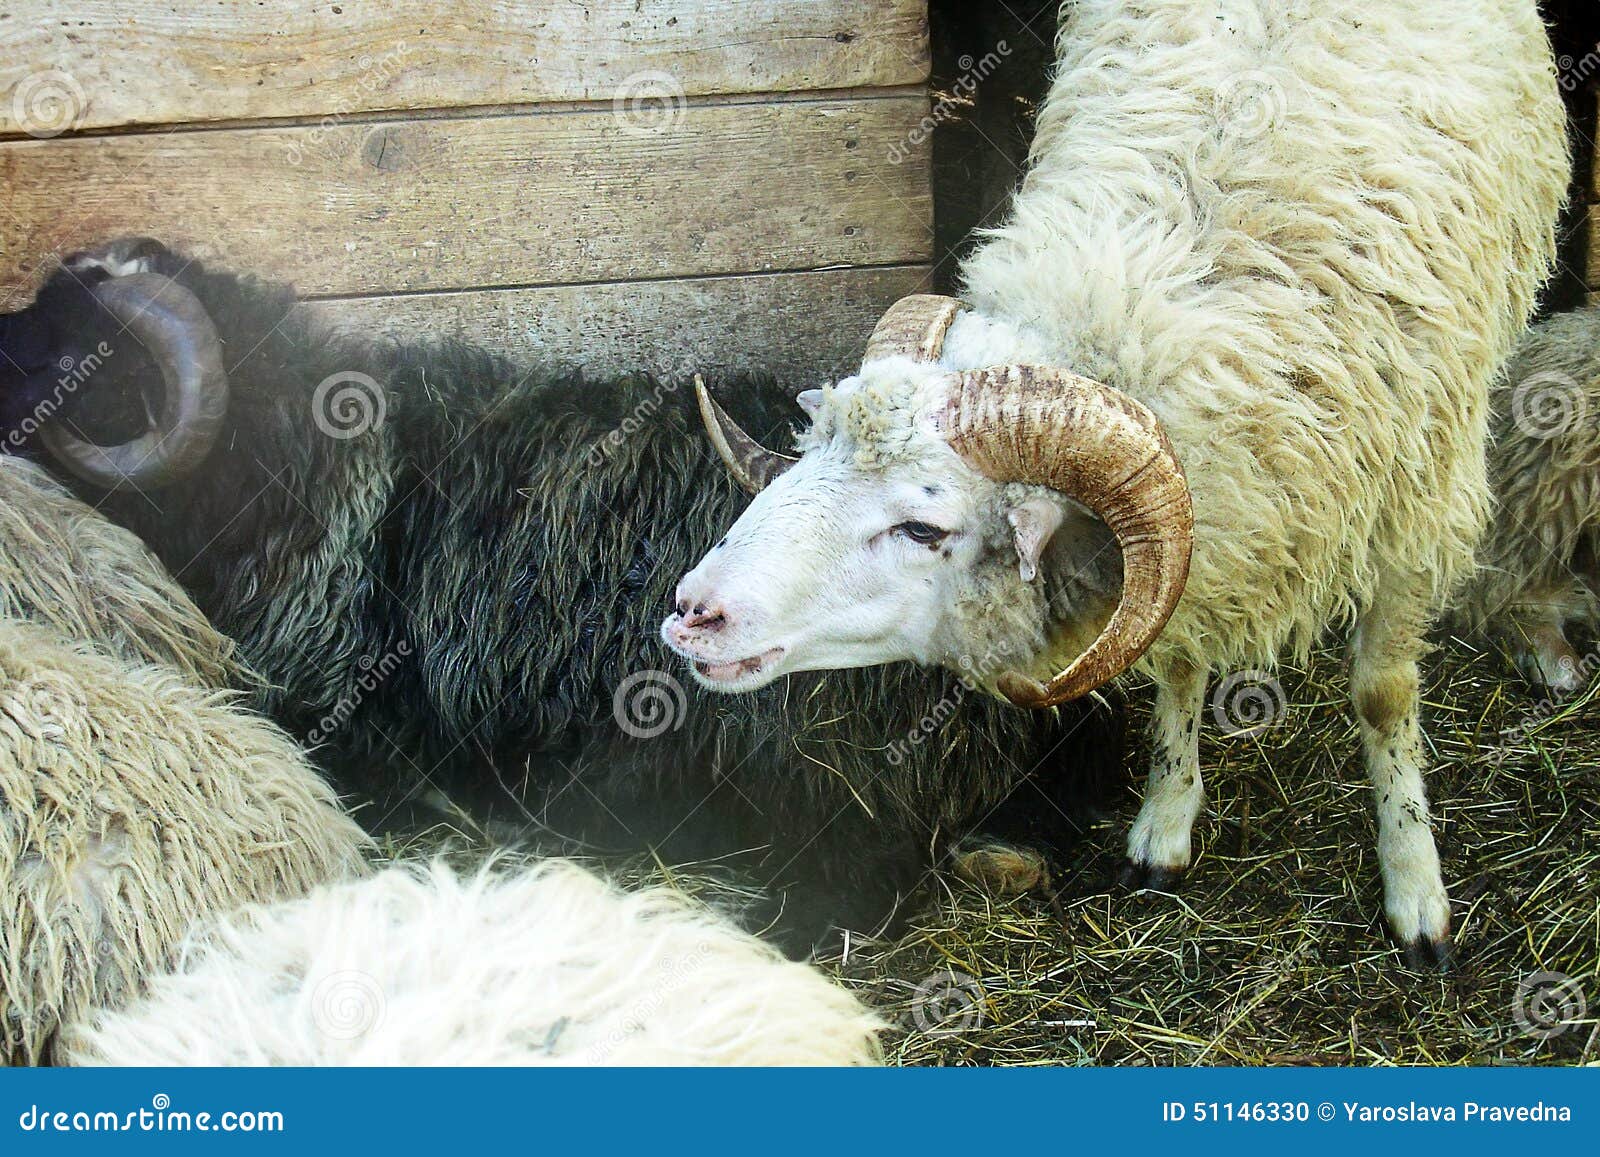 A few sheep stock photo. Image of domesticated, animals - 51146330